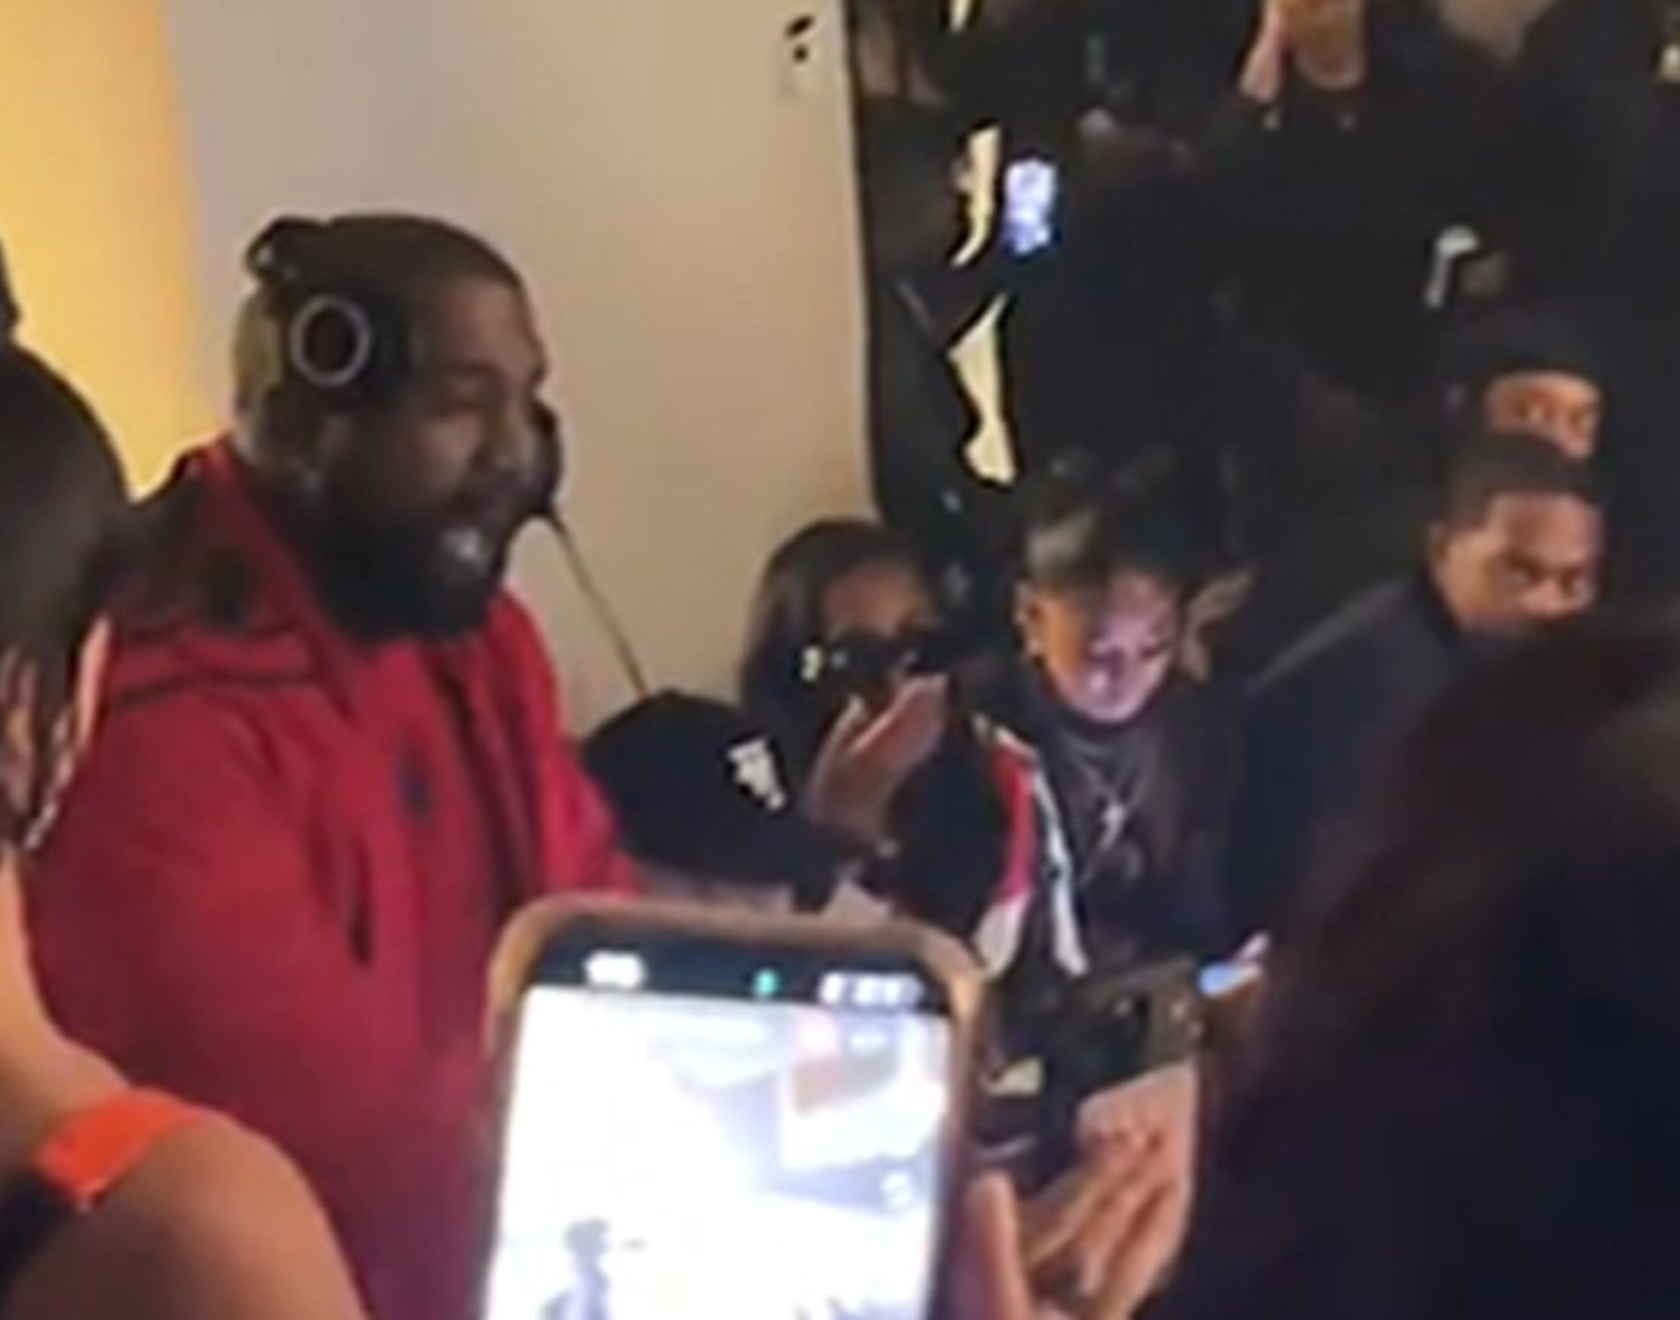 Kanye West at an event in Las Vegas